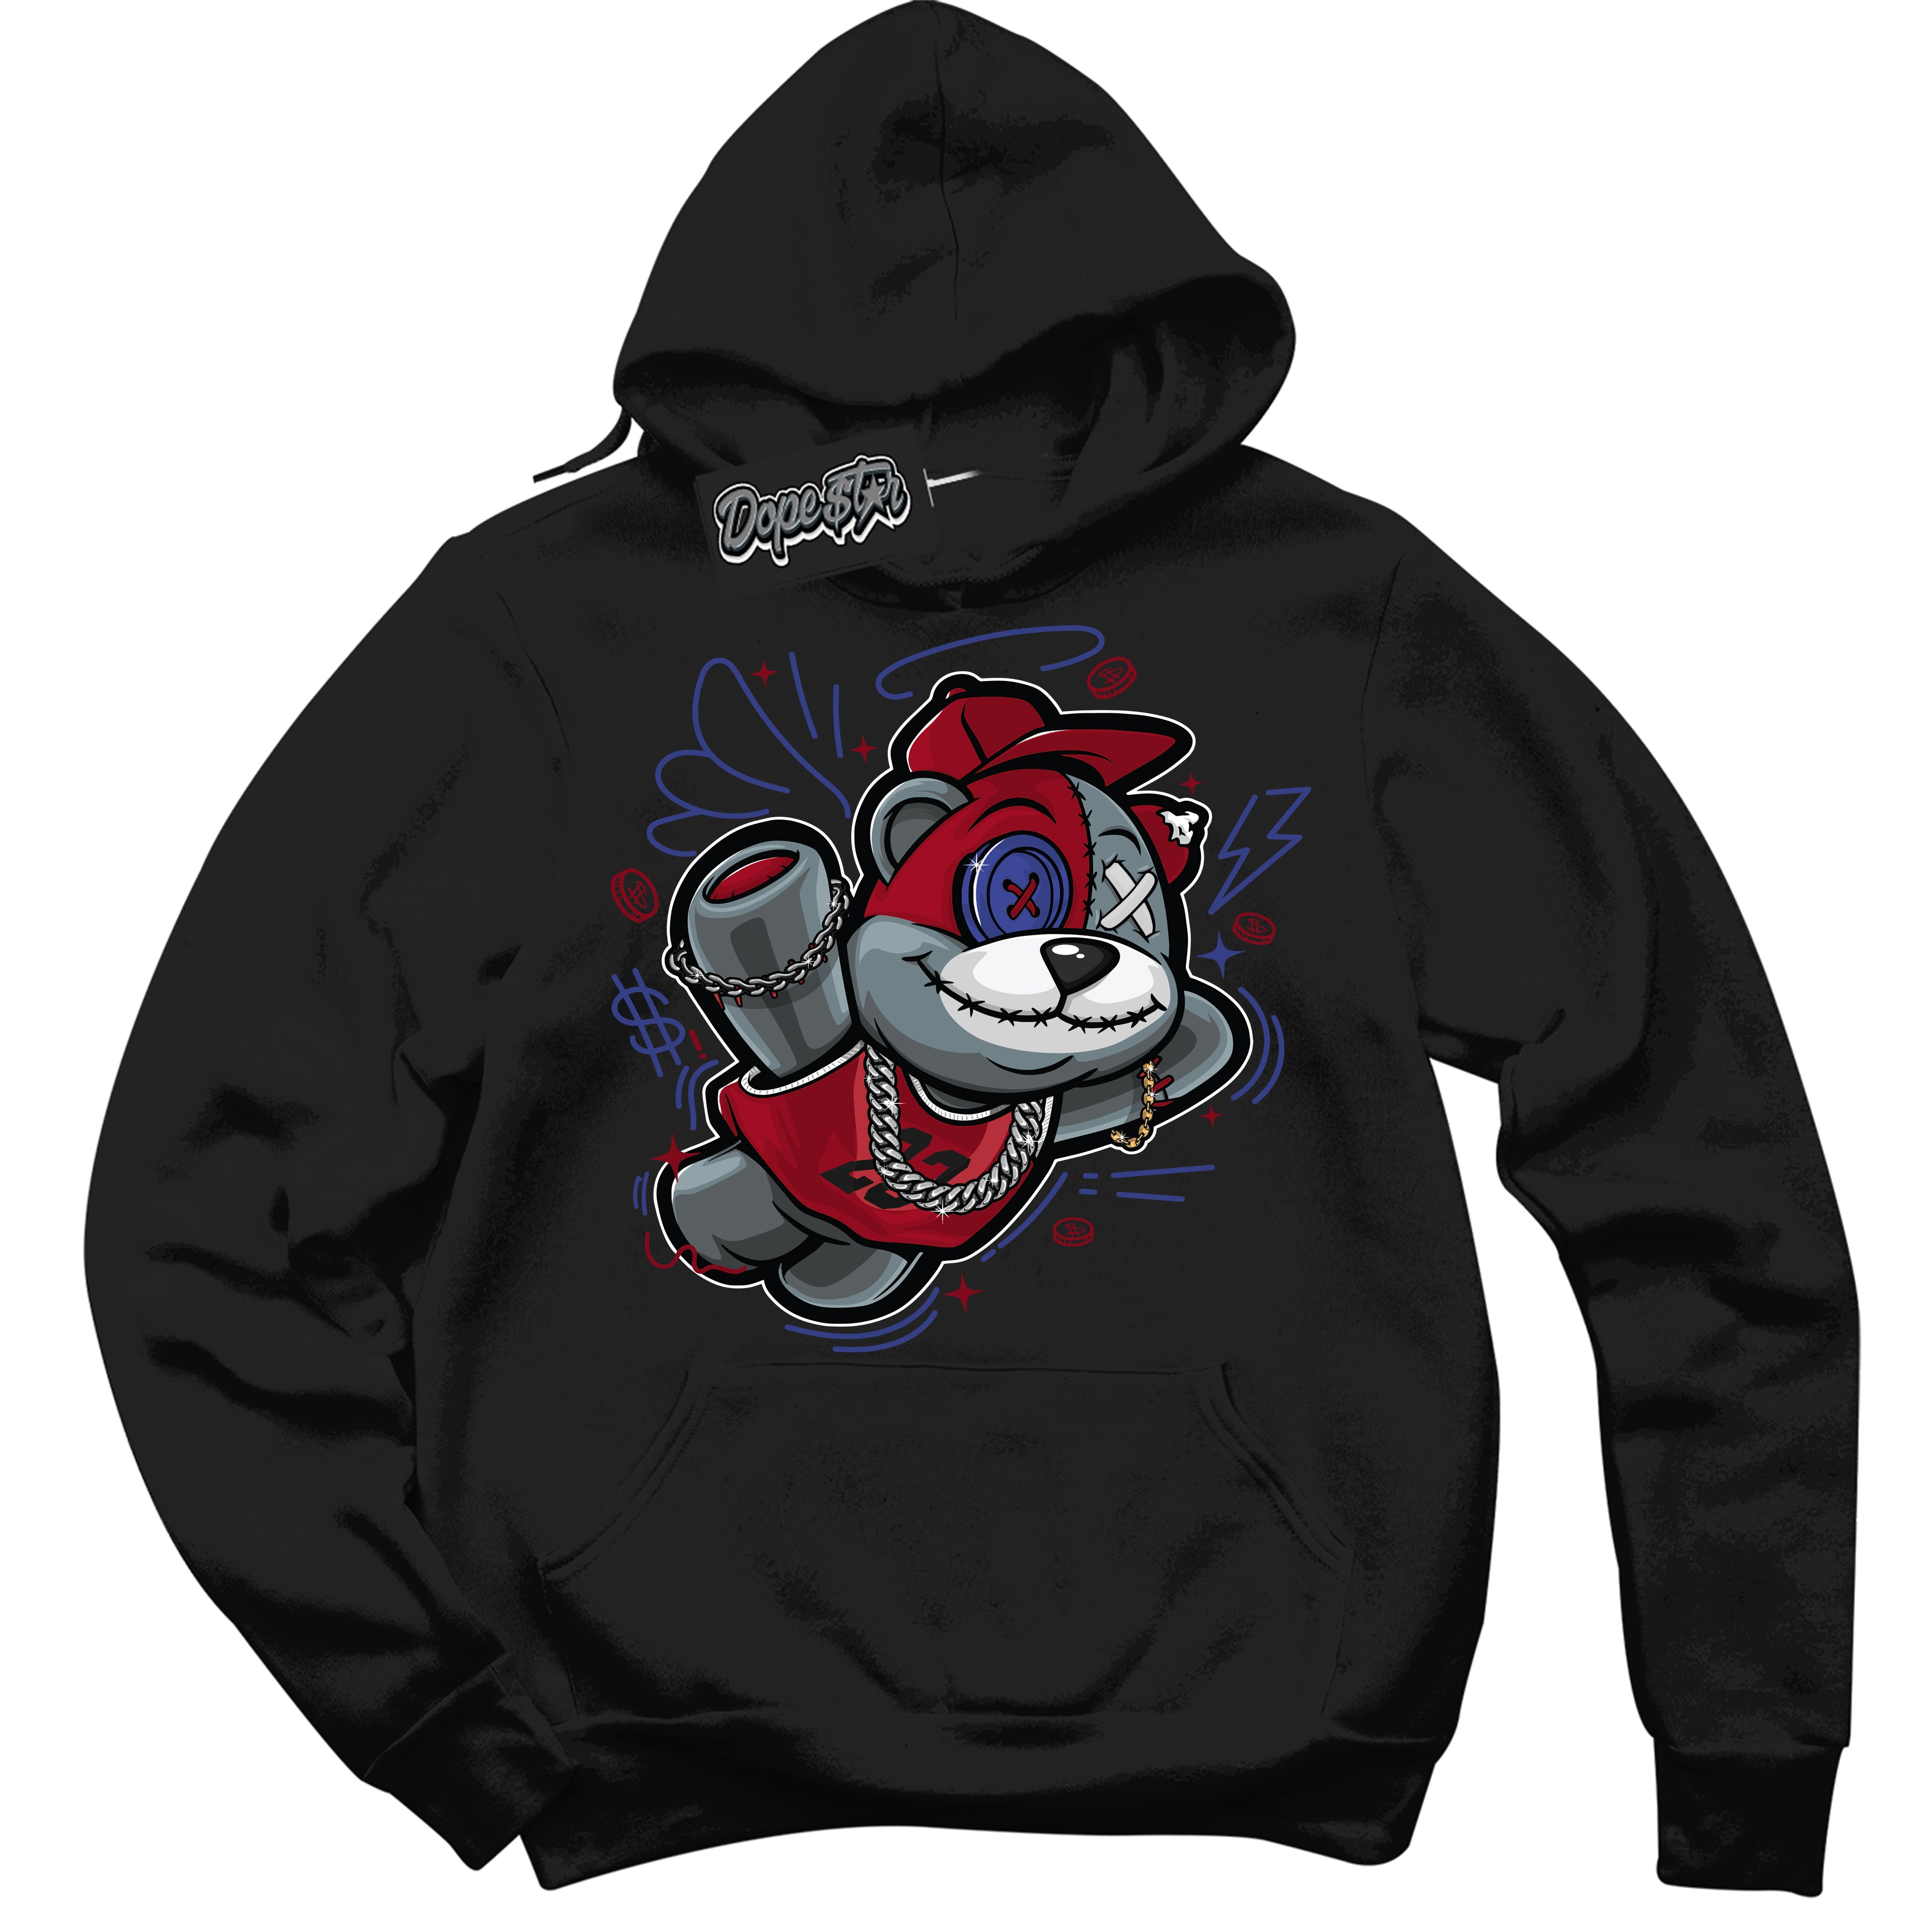 Cool Black Hoodie with “ Slam Dunk Bear ”  design that Perfectly Matches Playoffs 8s Sneakers.